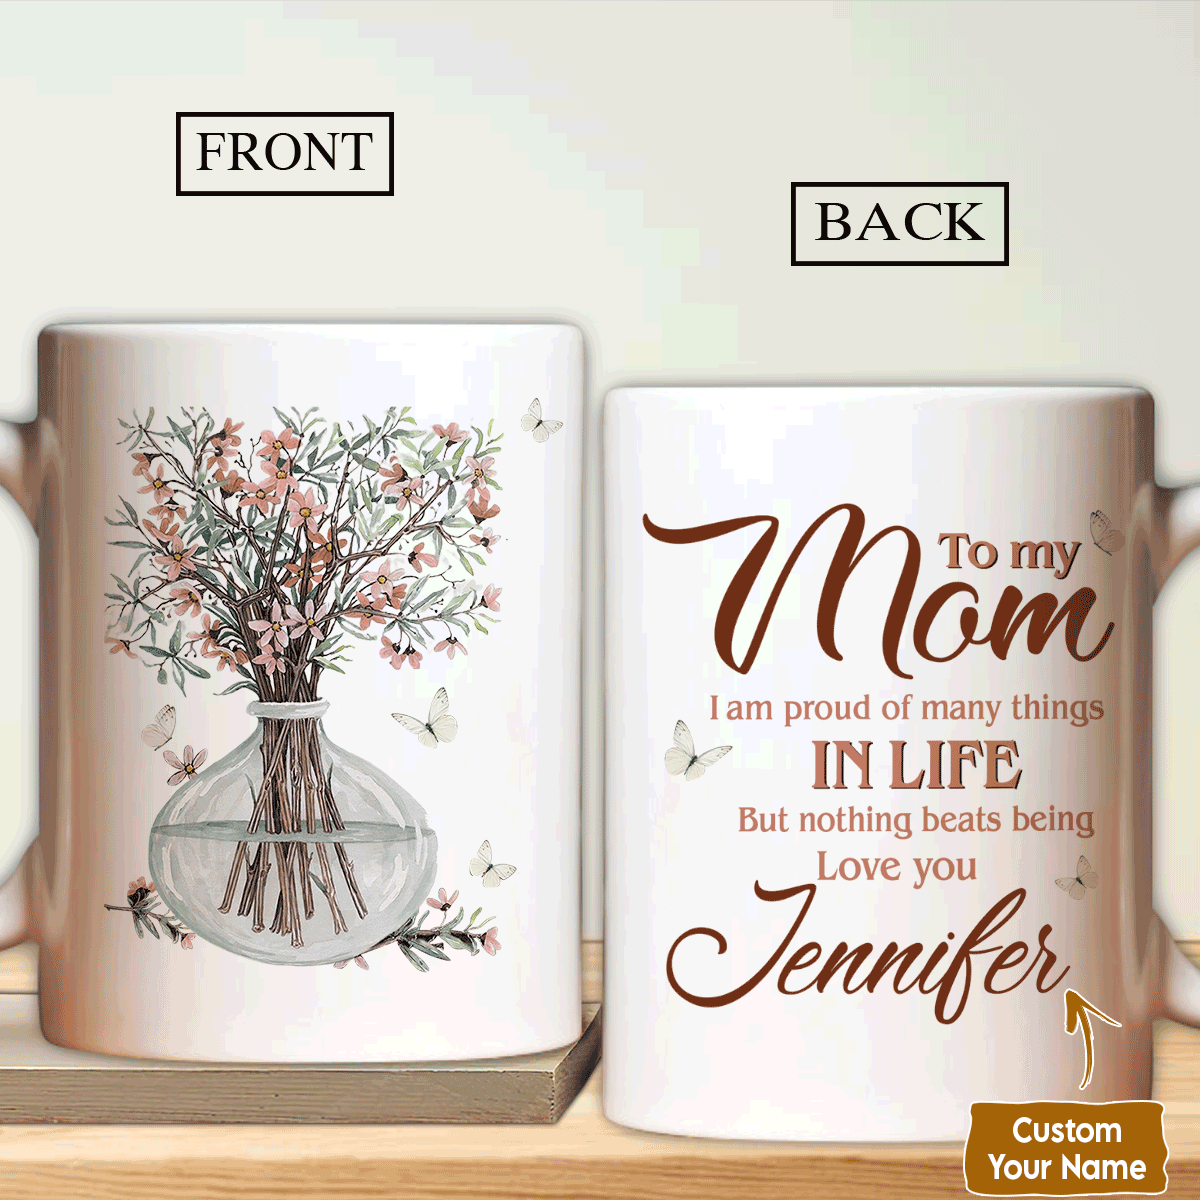 Gift For Mom Personalized Mug - Daughter to mom, Baby flower vase, Still life painting Mug - Custom Gift For Mother's Day, Presents for Mom- Proud Mug